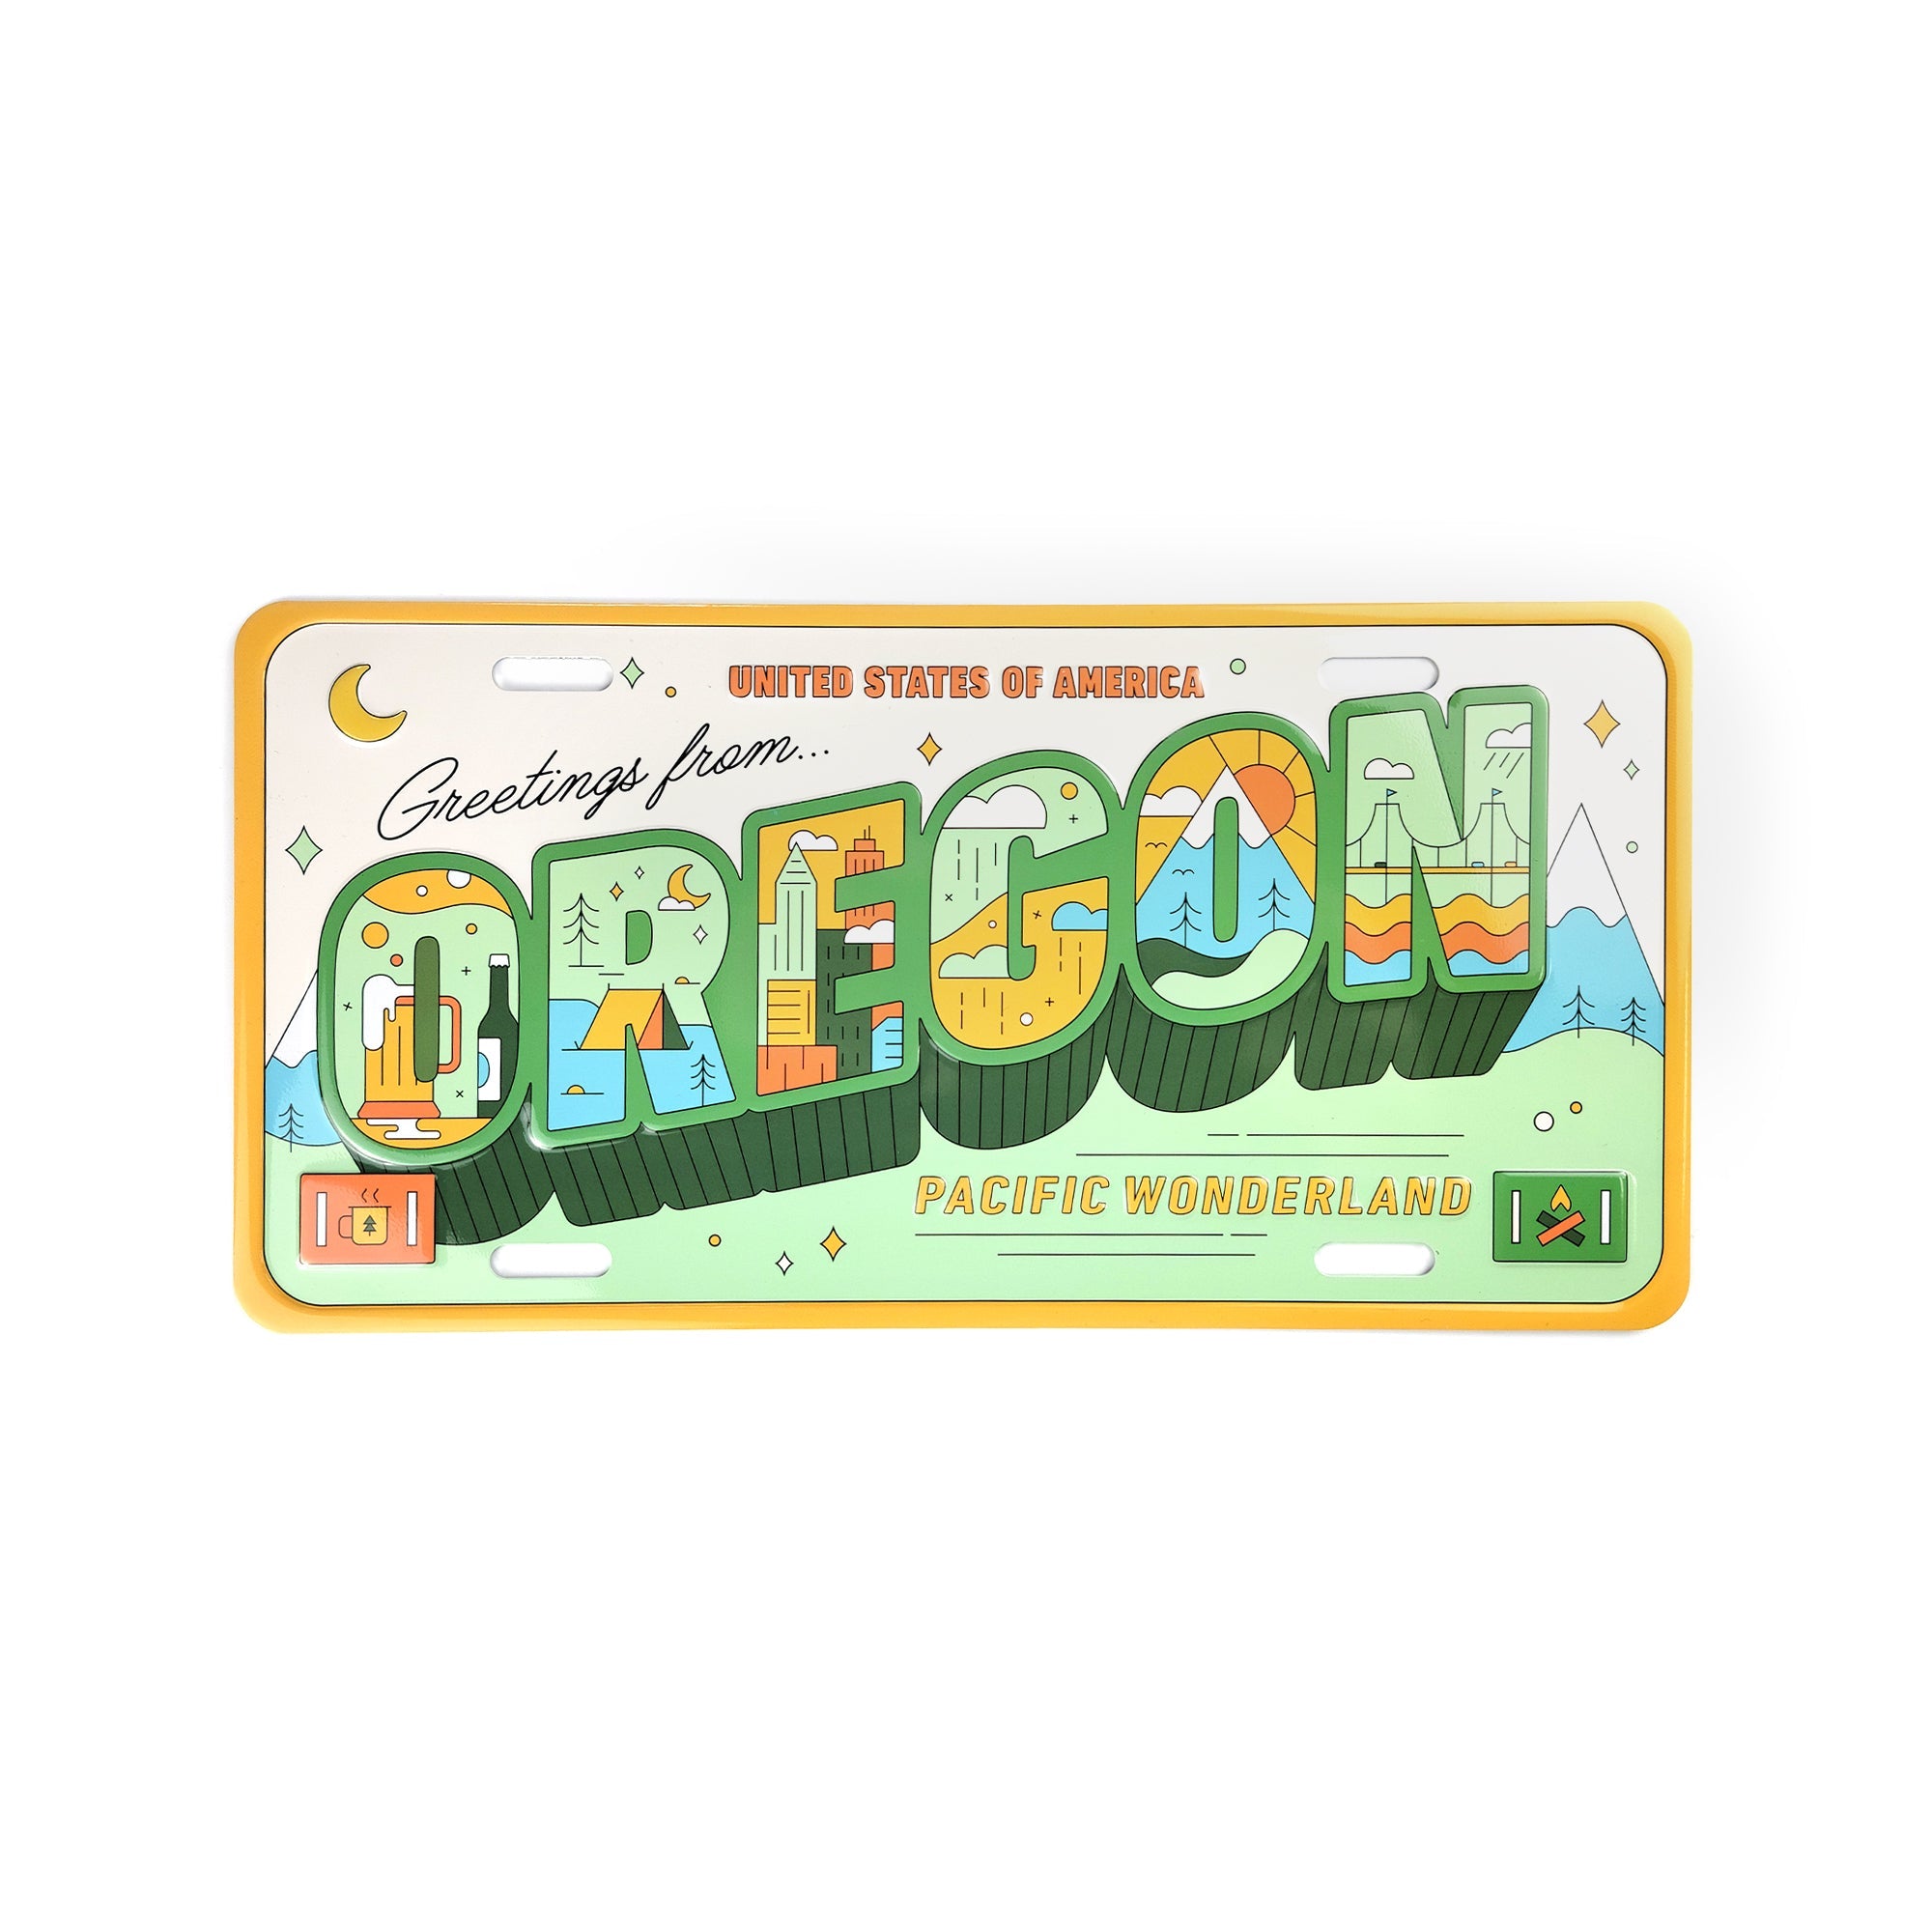 Greetings From Oregon Souvenir License Plate - Vehicle License Plates - Hello From Oregon